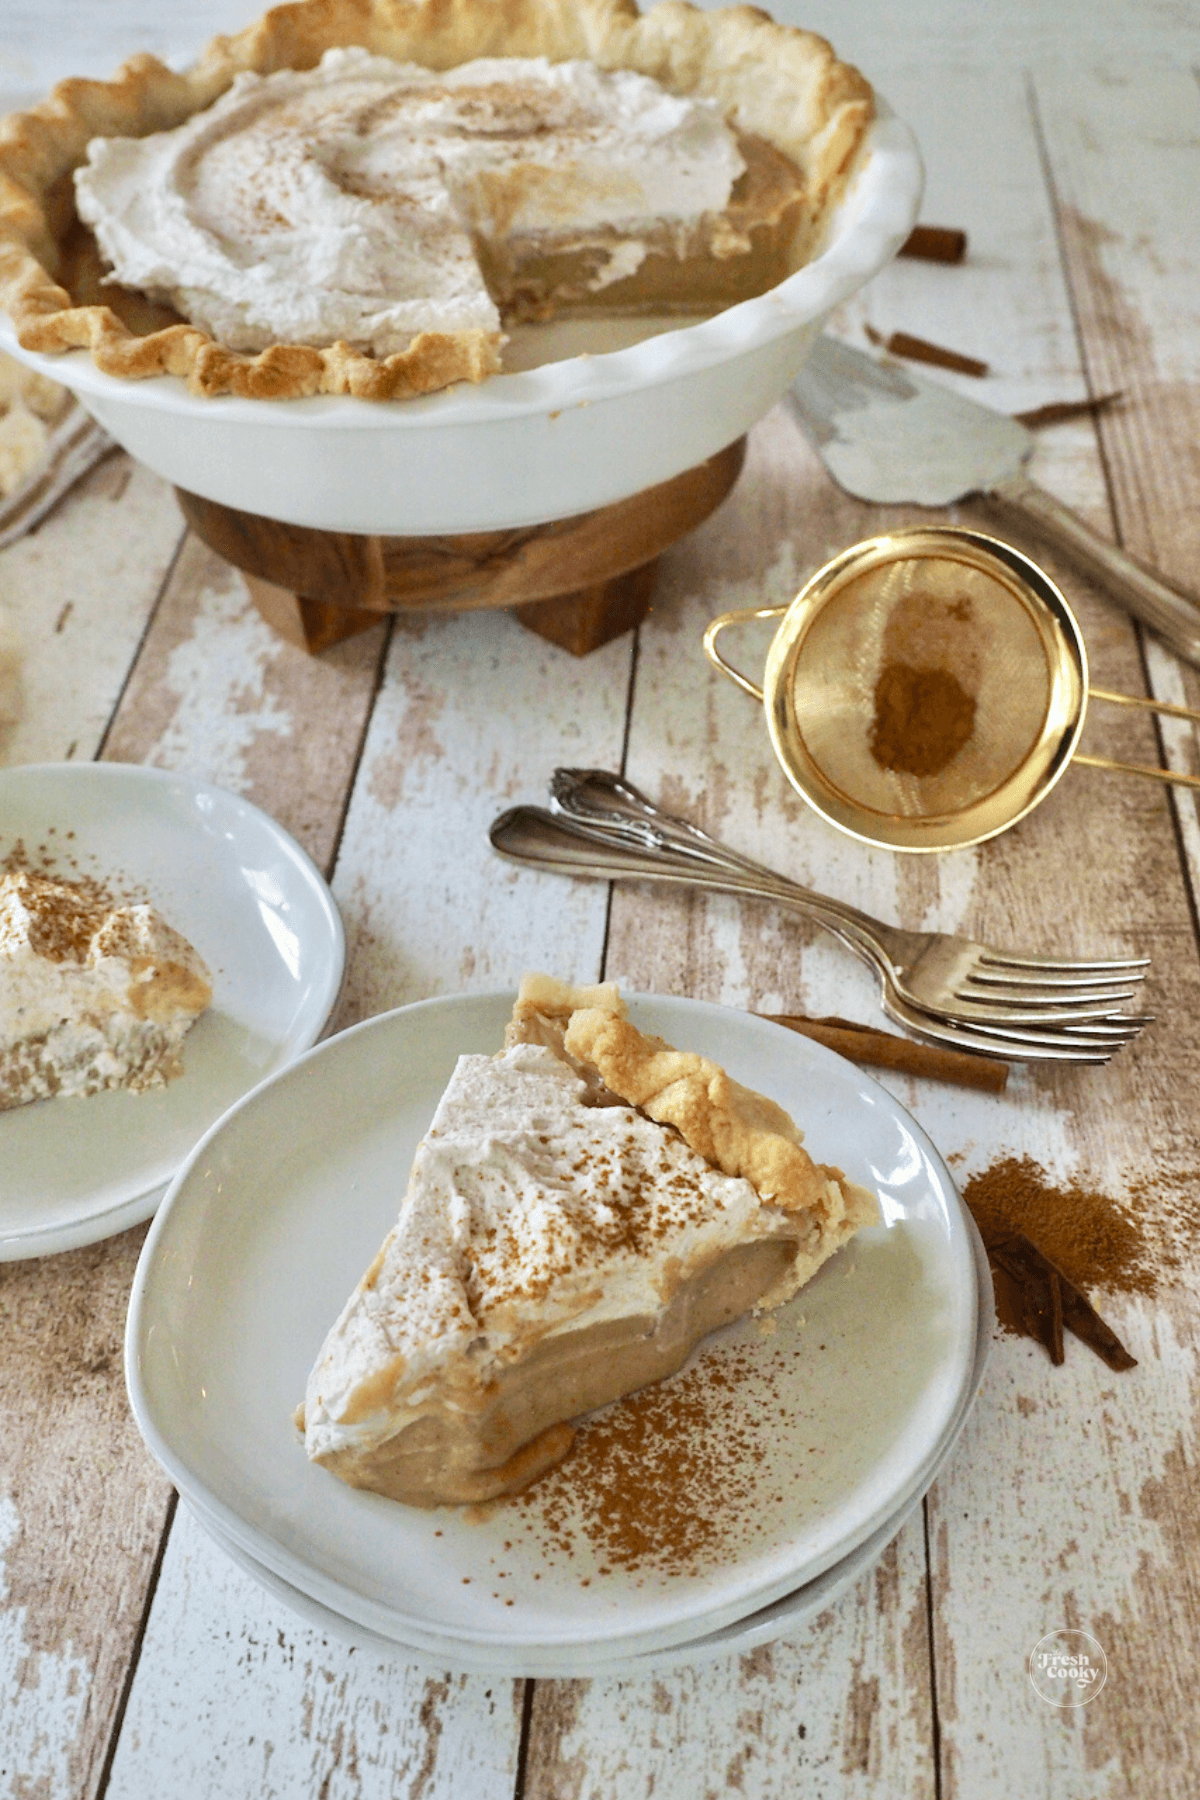 Sliced piece of butterscotch cinnamon pie, with whole pie in background.